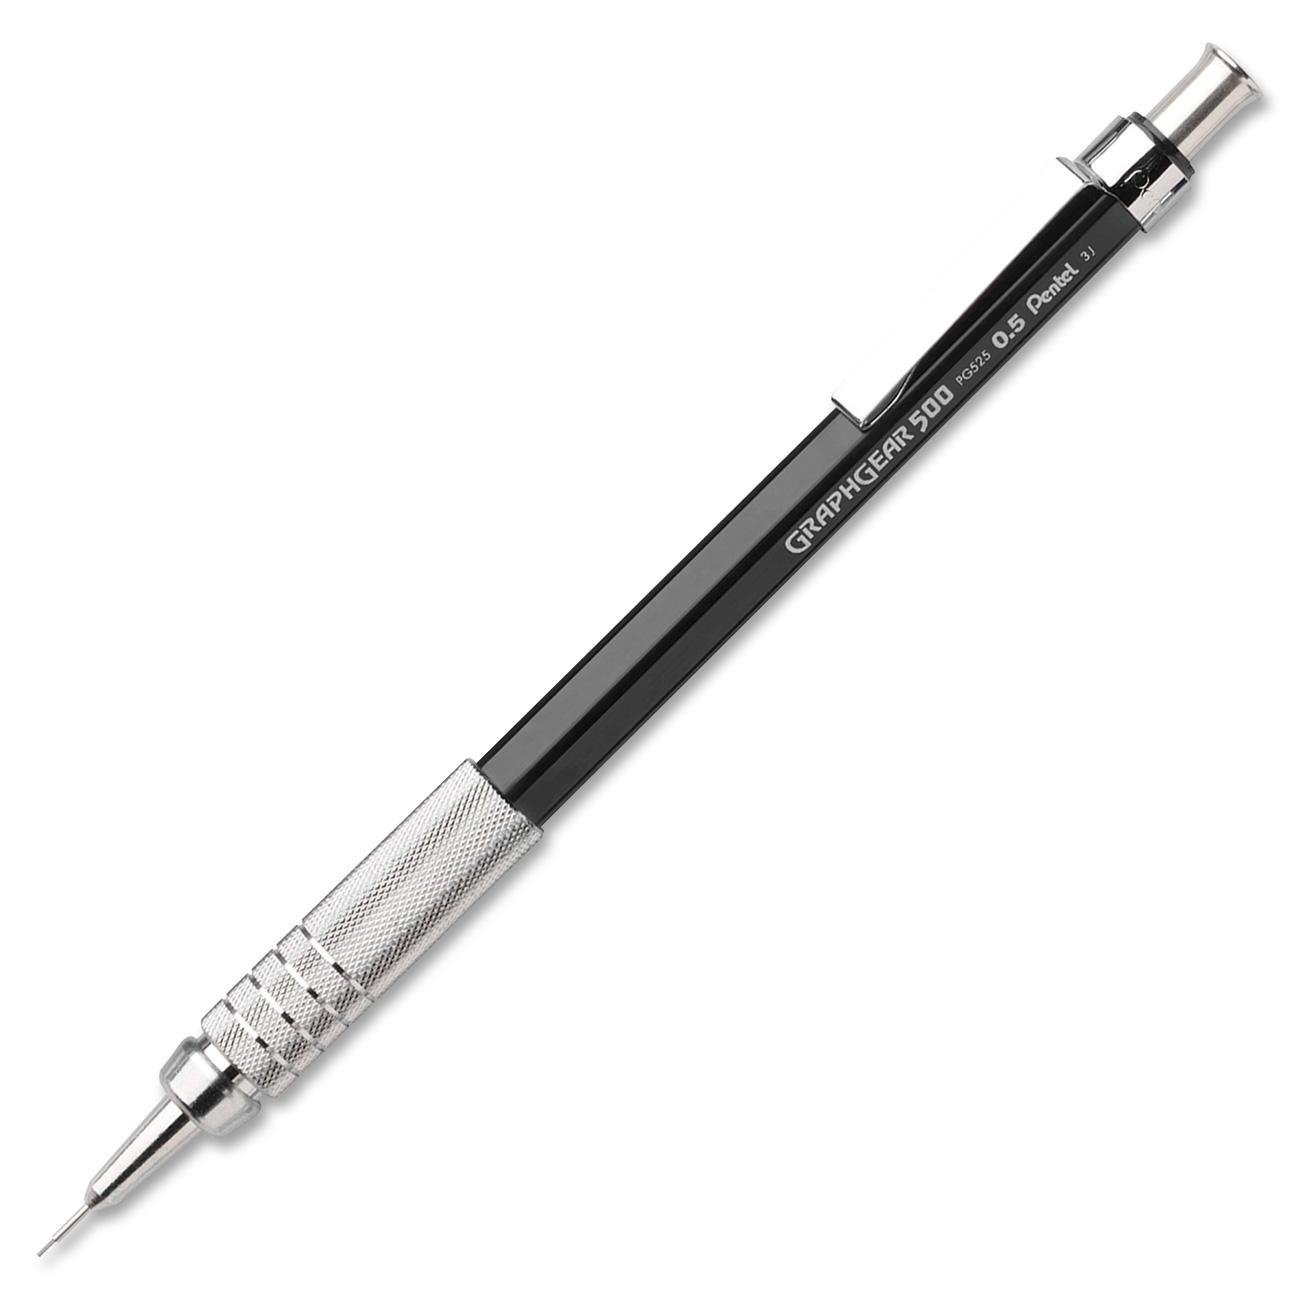 GraphGear 500 Mechanical pencil in the group Pens / Writing / Mechanical Pencils at Pen Store (104506_r)